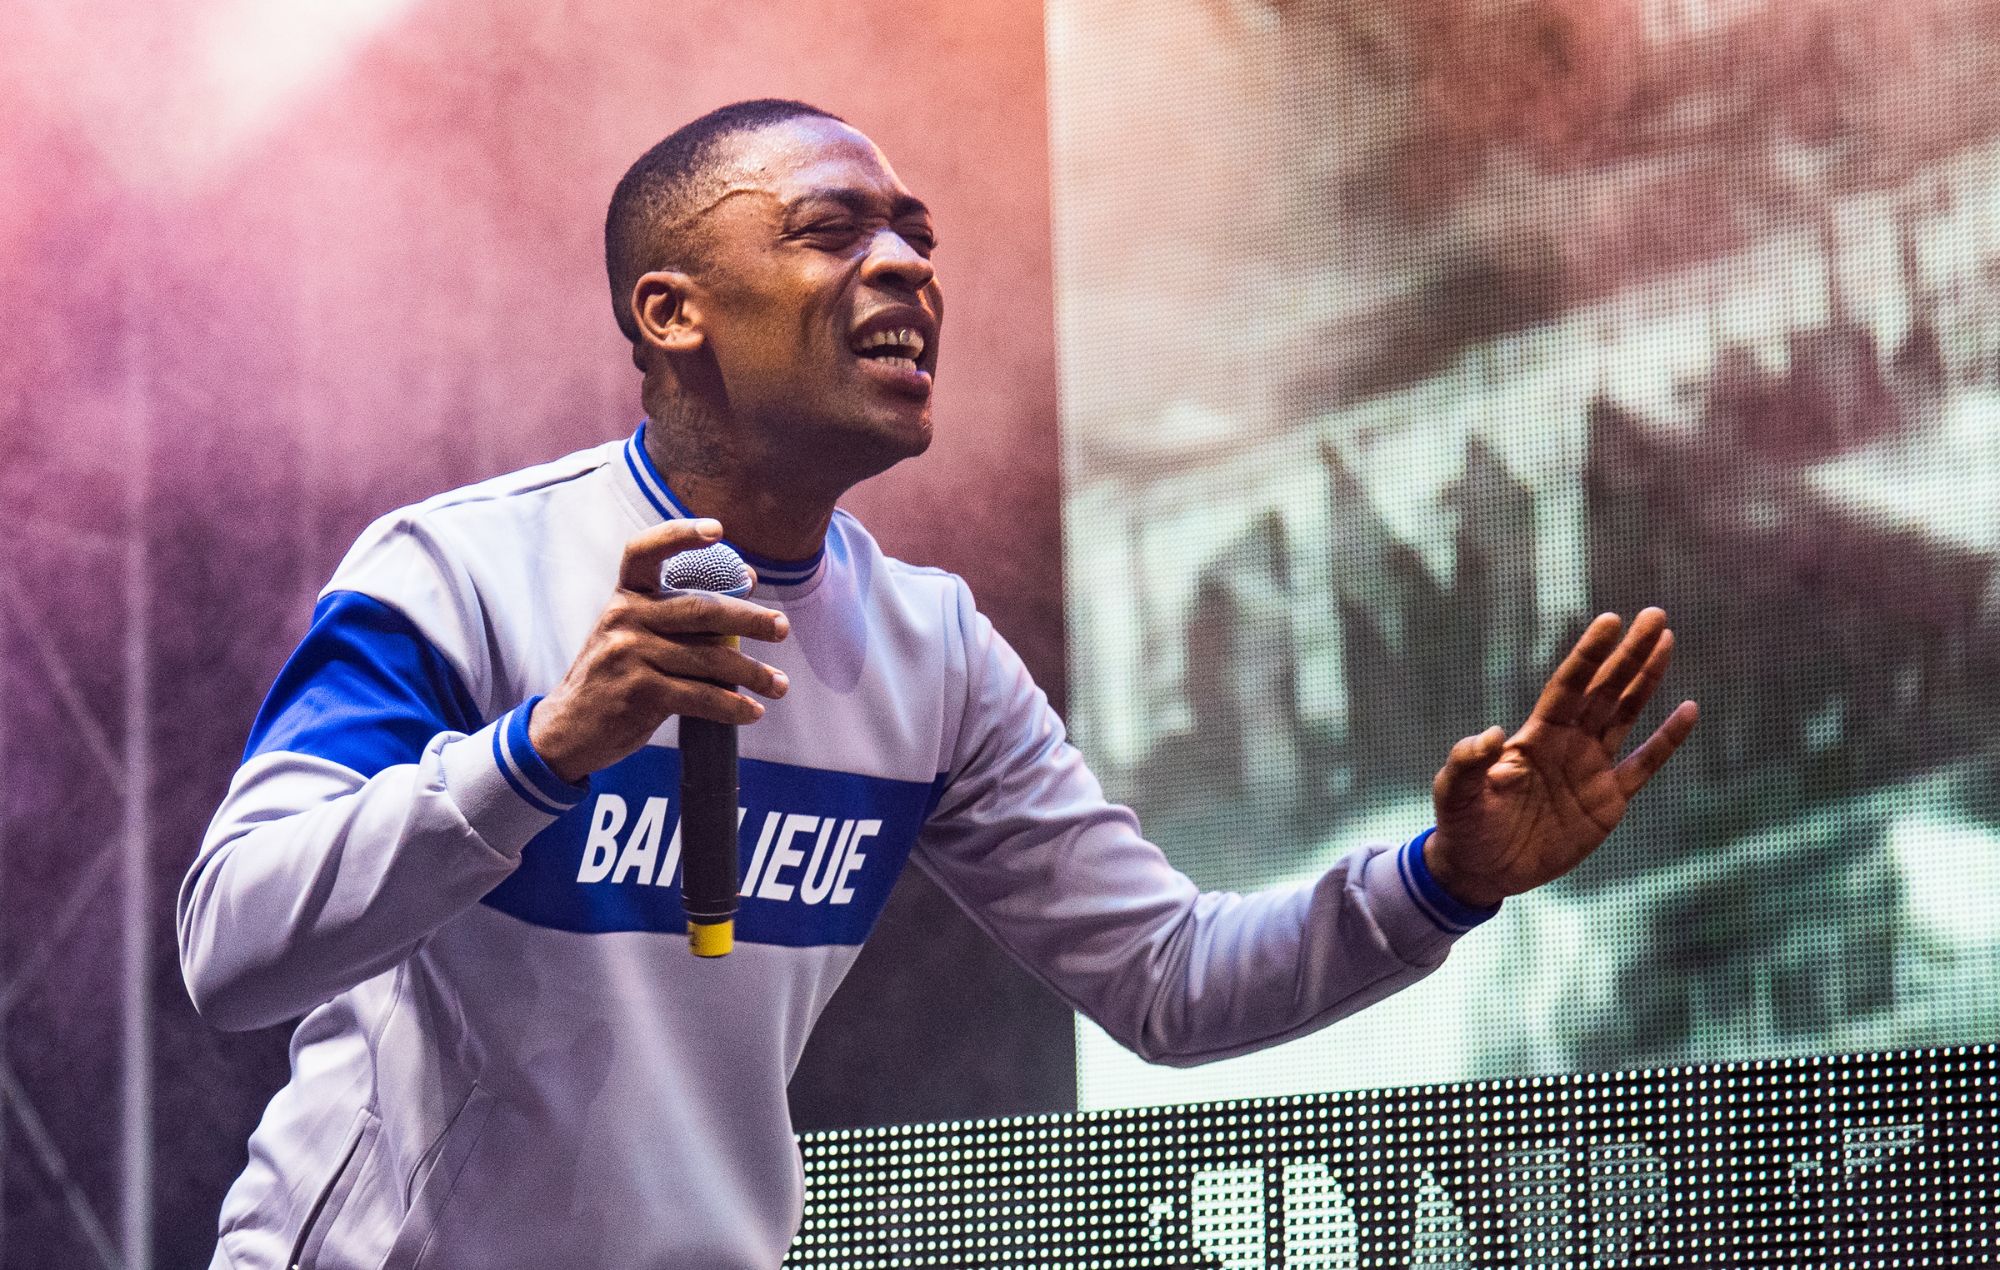 Wiley performs on stage during day 2 of South West Four Festival 2019 at Clapham Common on August 25, 2019 in London, England.